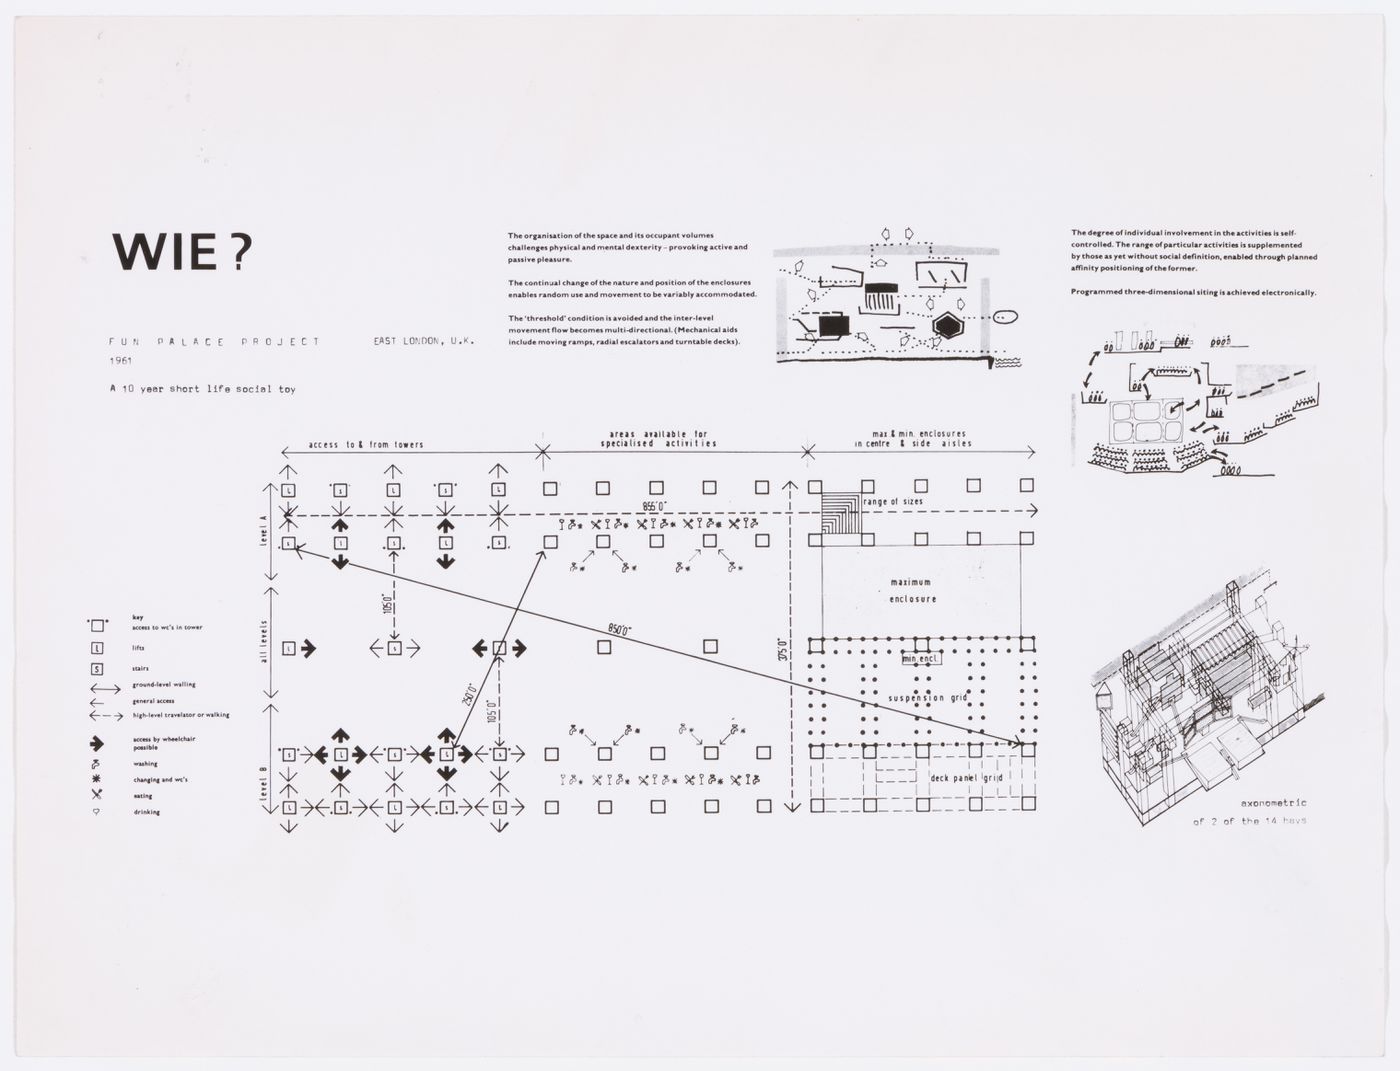 Plan, axonometric, sketches and description for a 1961 Fun Palace Project